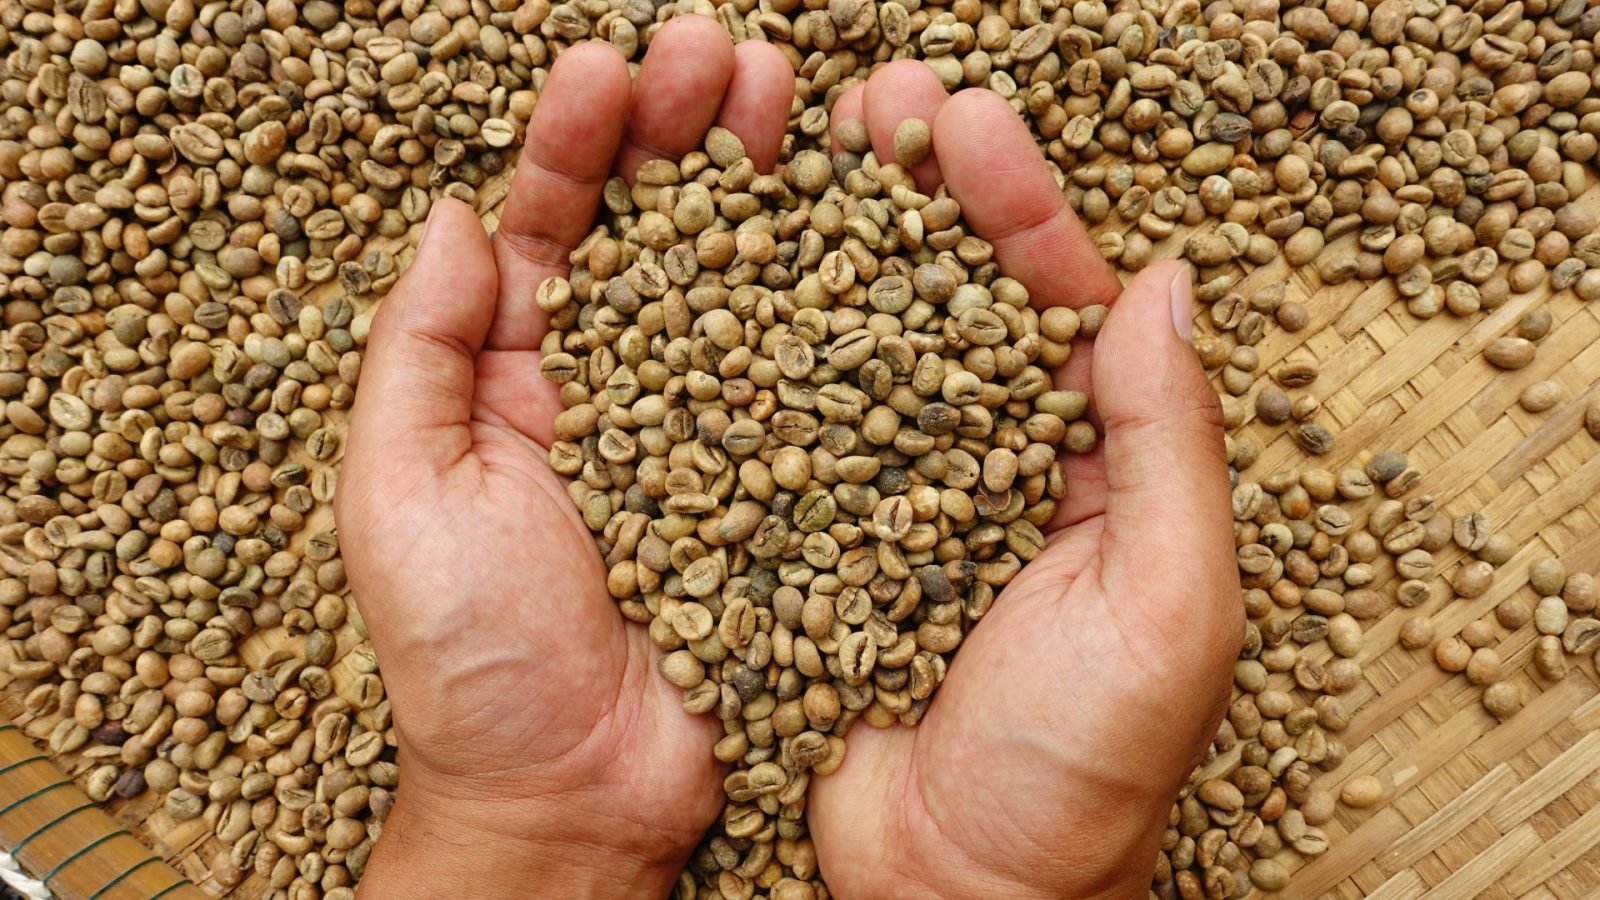 Where Do Sumatra Coffee Beans Come From